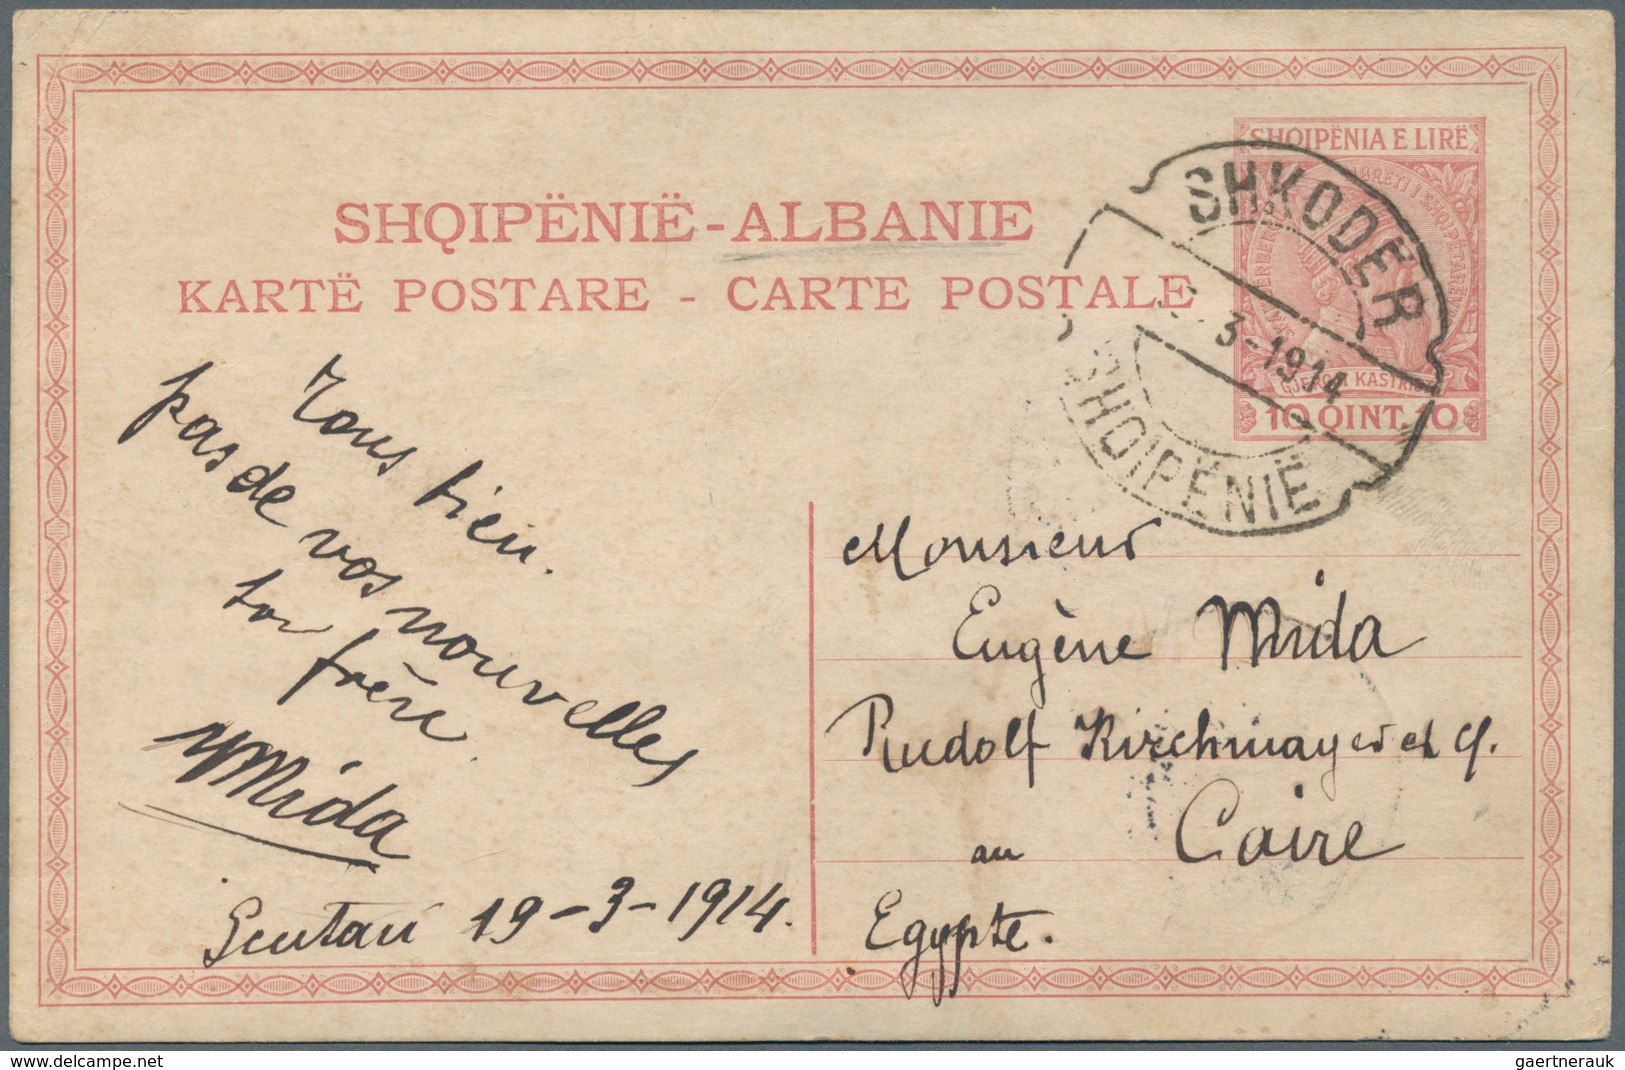 Albanien - Ganzsachen: 1914 Postal Stationery Card 10 Qint Rose From Shkoder To Caire Egypt, Rare De - Albanie